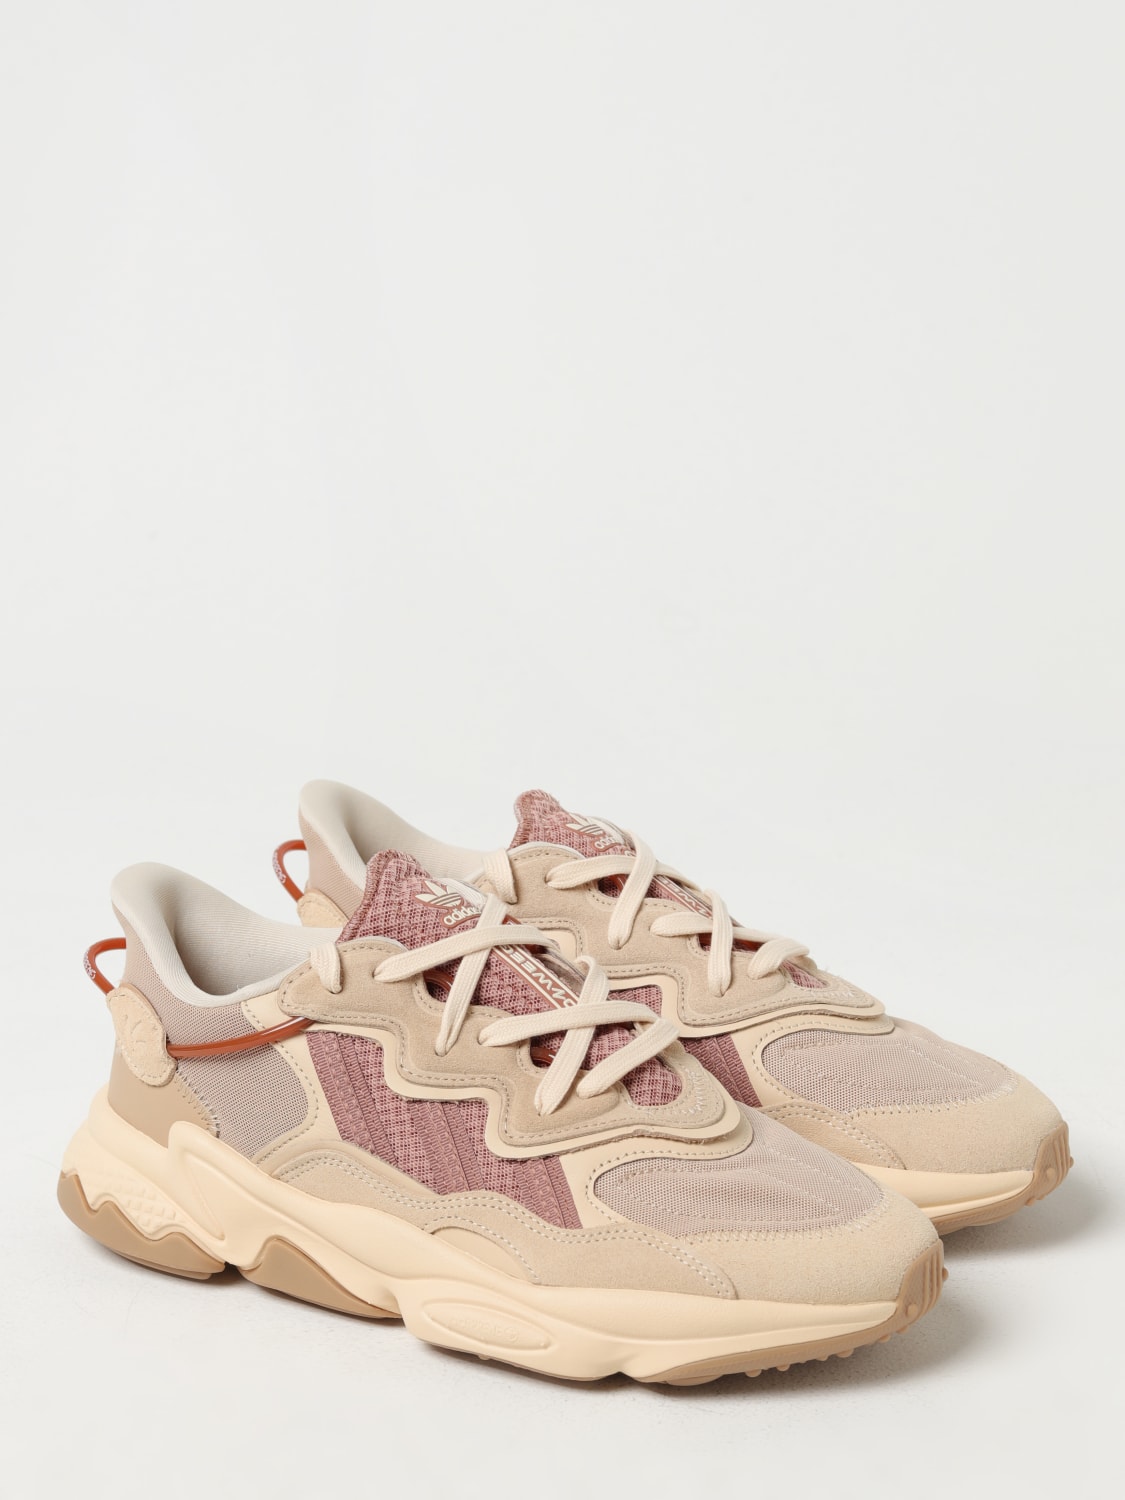 Ozweego ID9821 online ADIDAS ORIGINALS: in and Adidas sneakers Originals sneakers Beige | at suede - mesh